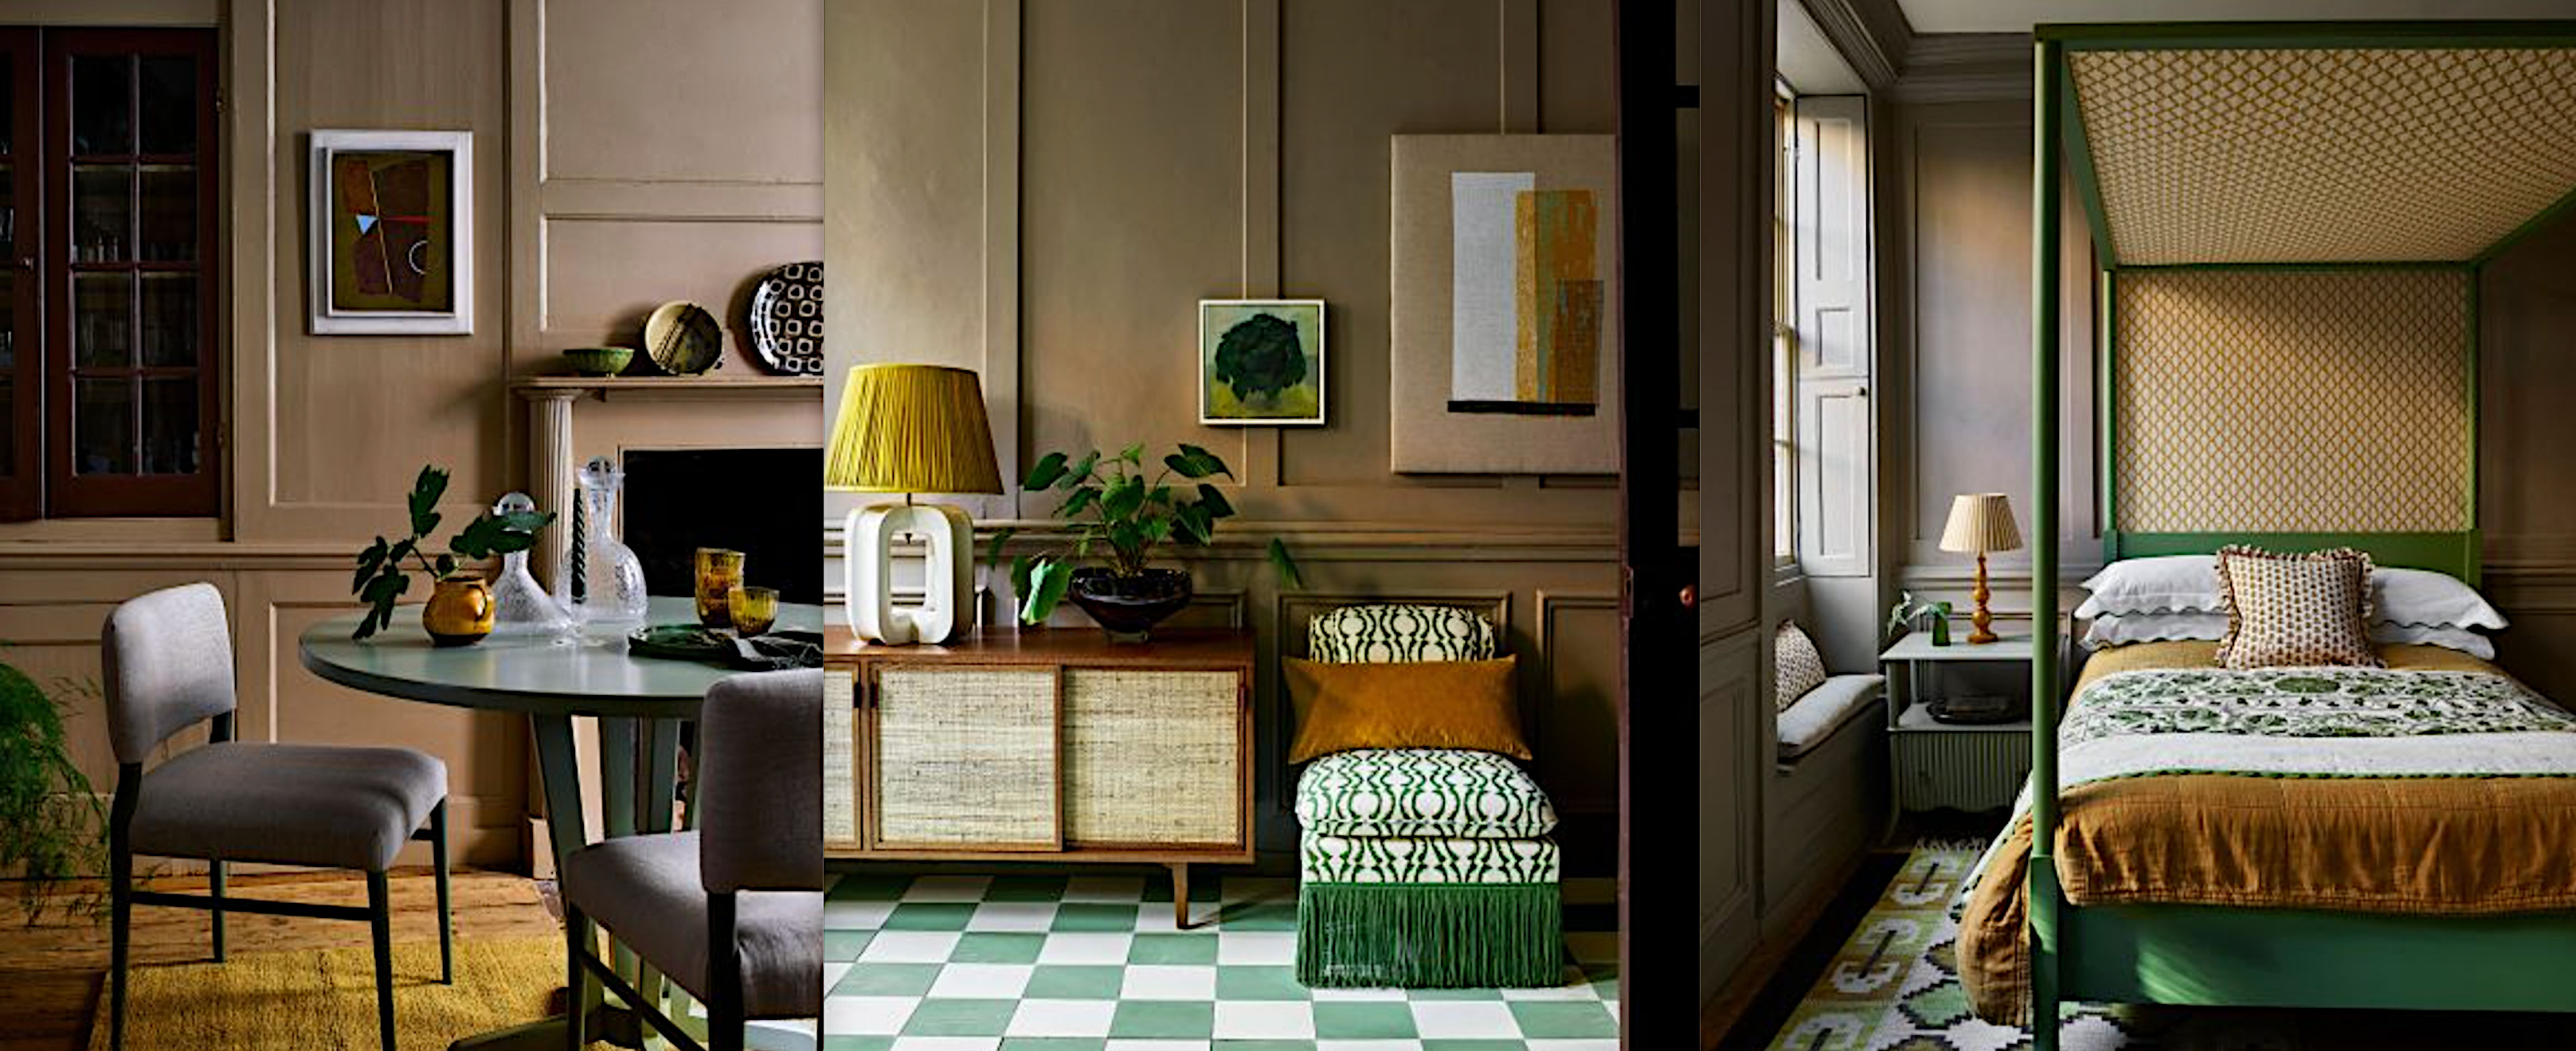 Yellow And Green Room Ideas: 10 Ways With Natural Tones |